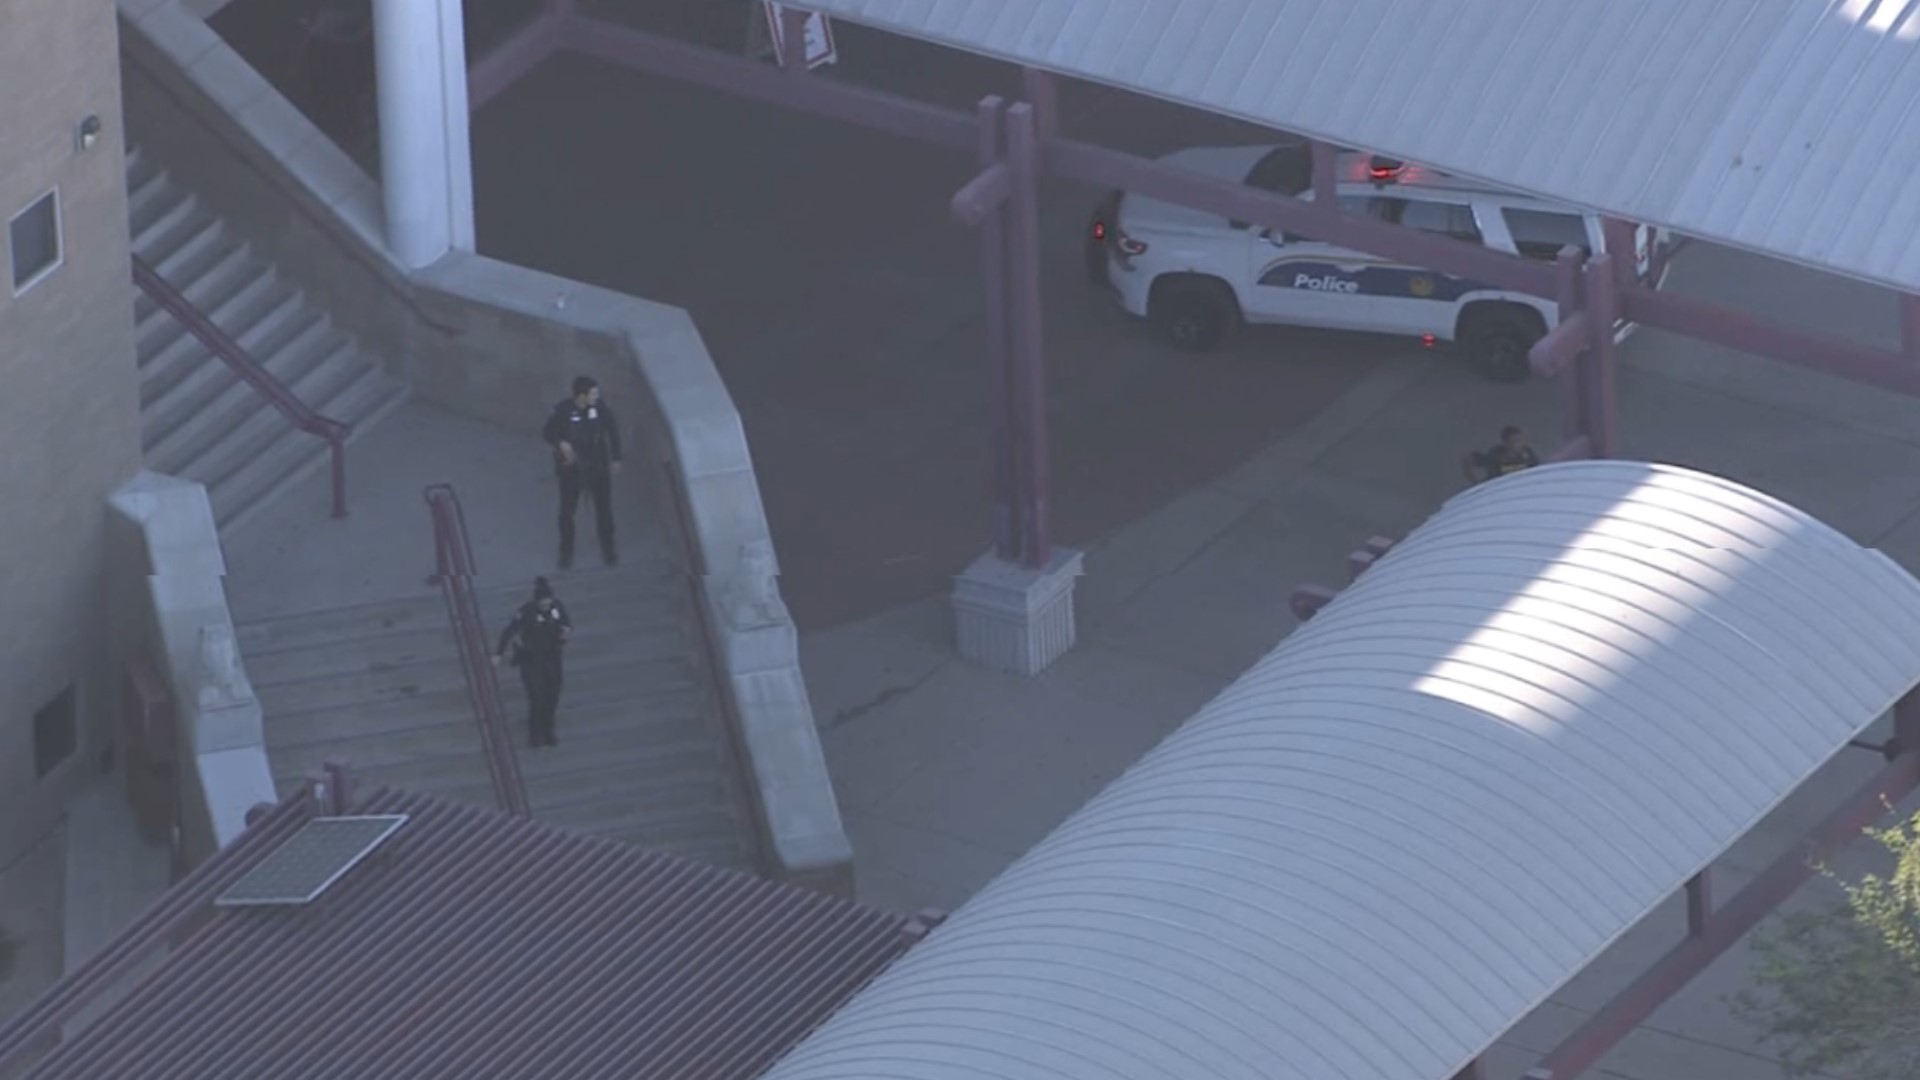 A teenager was injured after a shooting at Cesar Chavez High School on Monday. There is no active threat, according to the Phoenix Police Department.